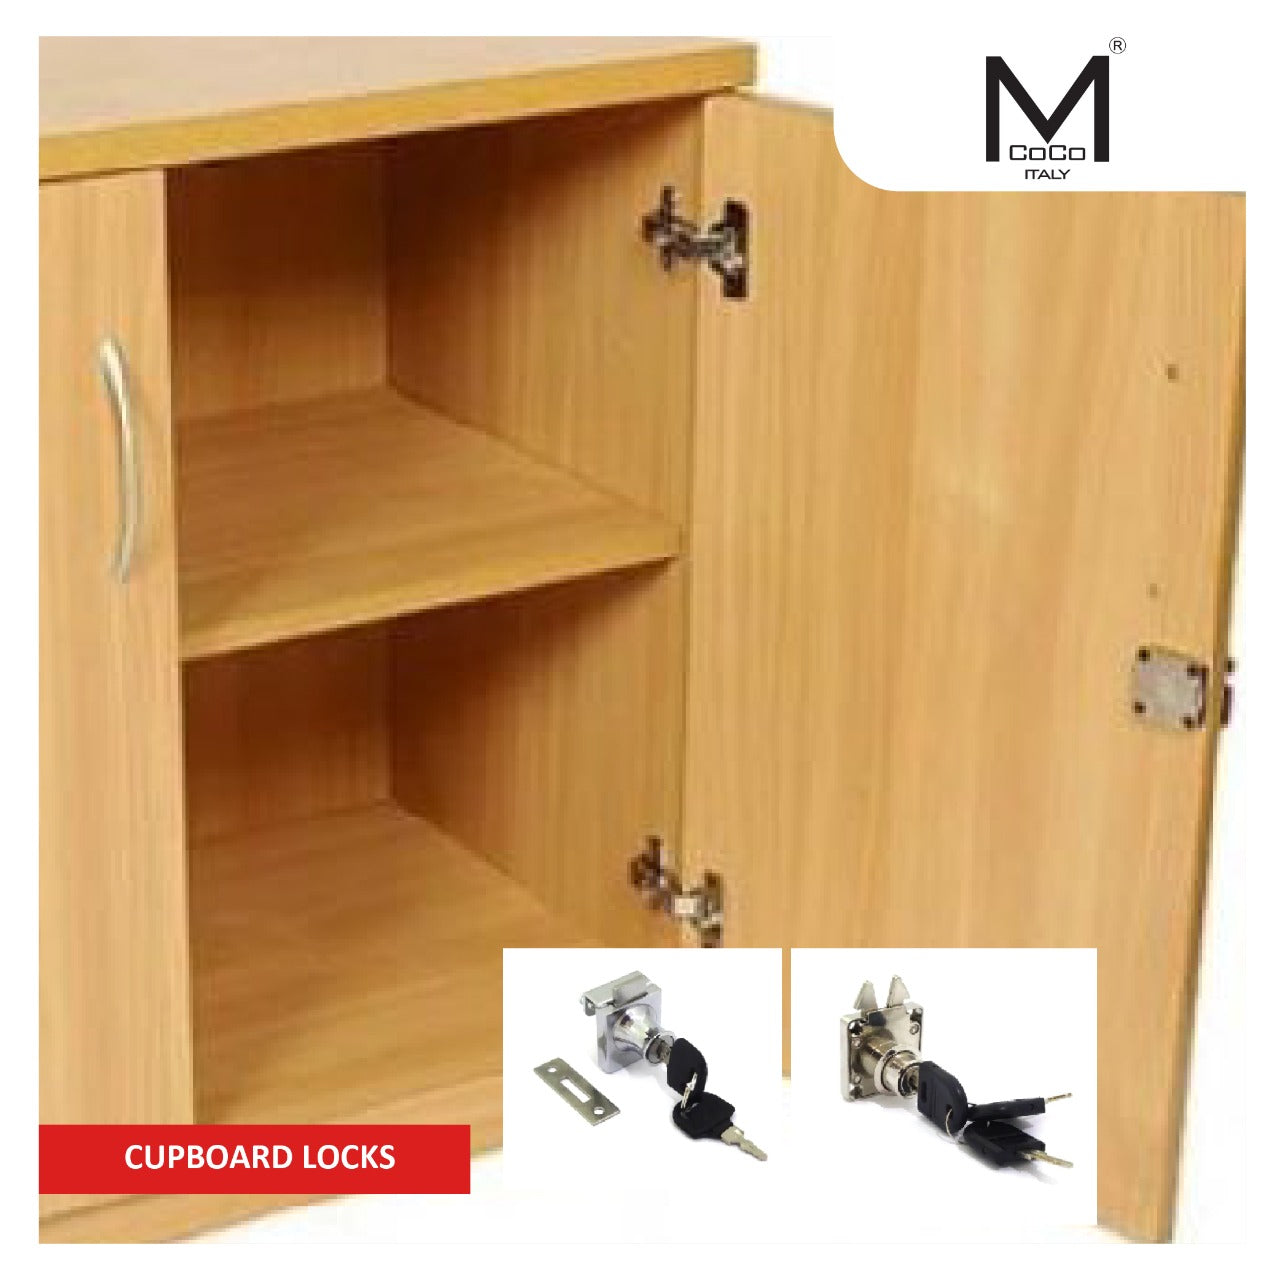 Mcoco Cupboard Locks - Secure and Stylish Locking Solutions for Cabinets and Cupboards - Available at M. M. Noorbhoy & Co.